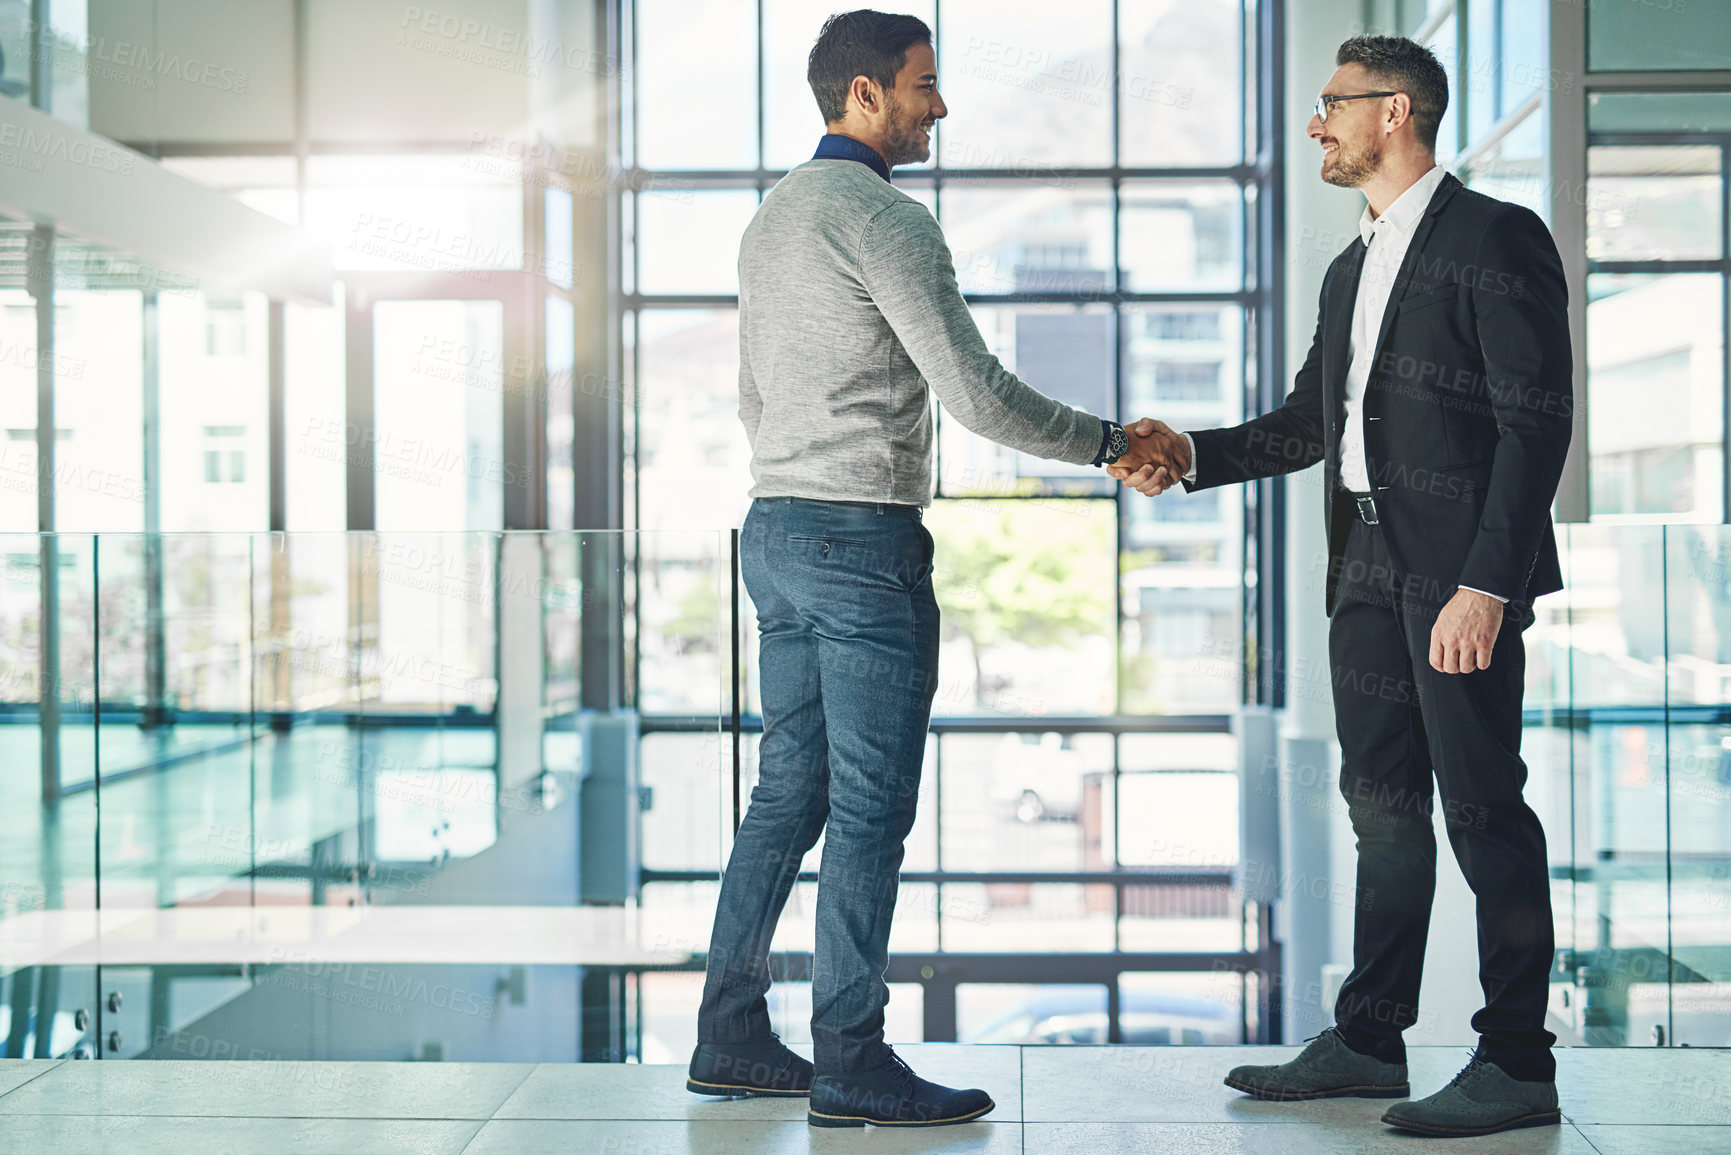 Buy stock photo Shot of two businessmen shaking hands together in an office